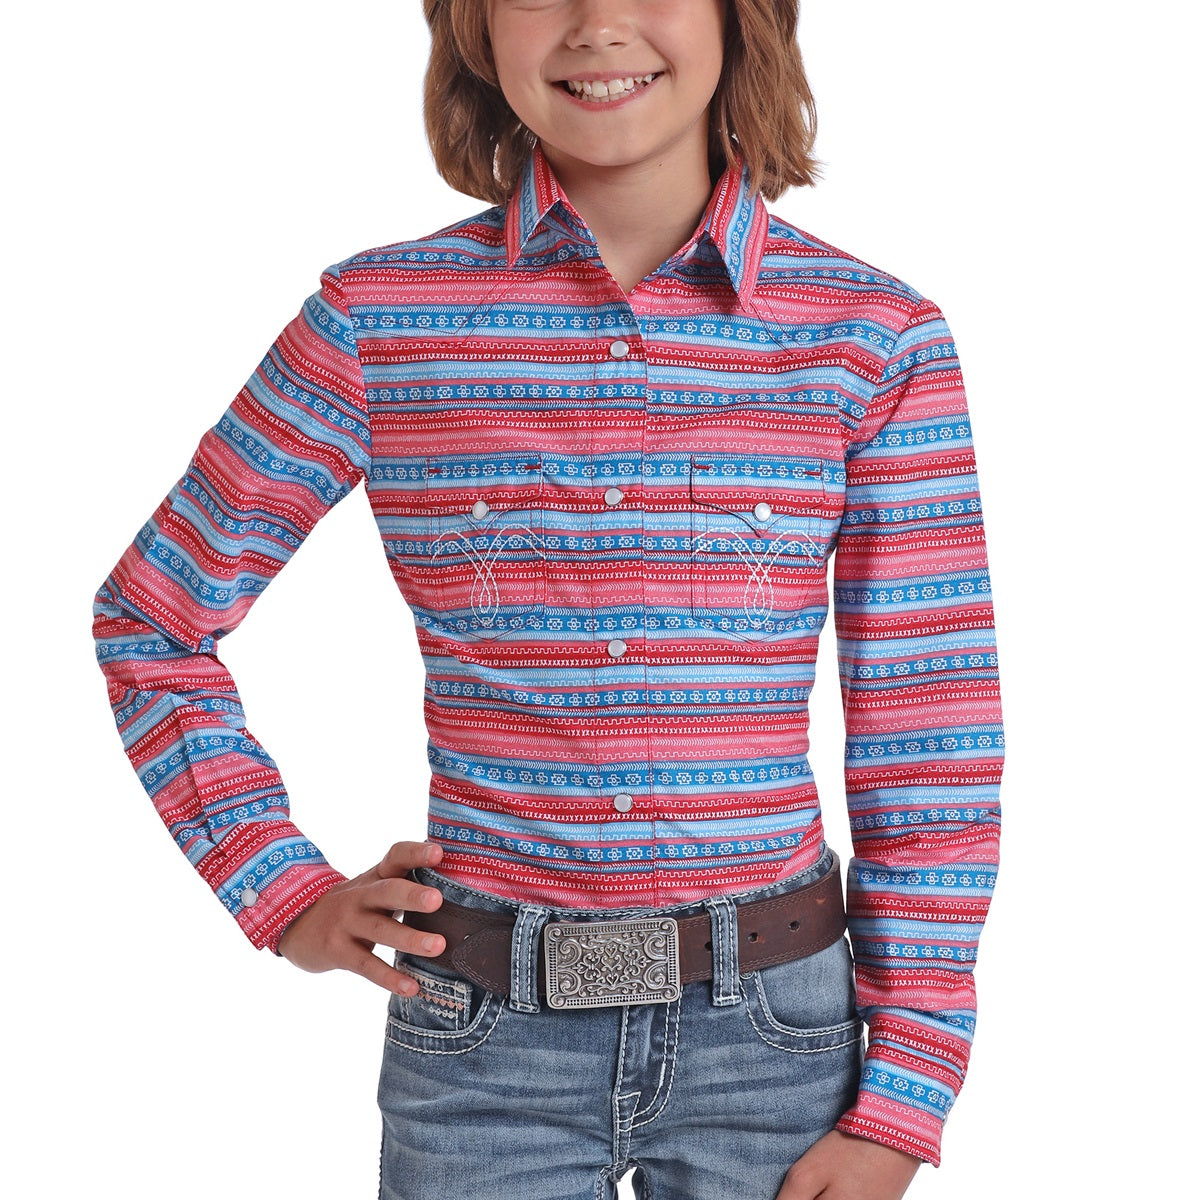 Panhandle Children's Red & Blue Stripped Snap Shirt C6S5460